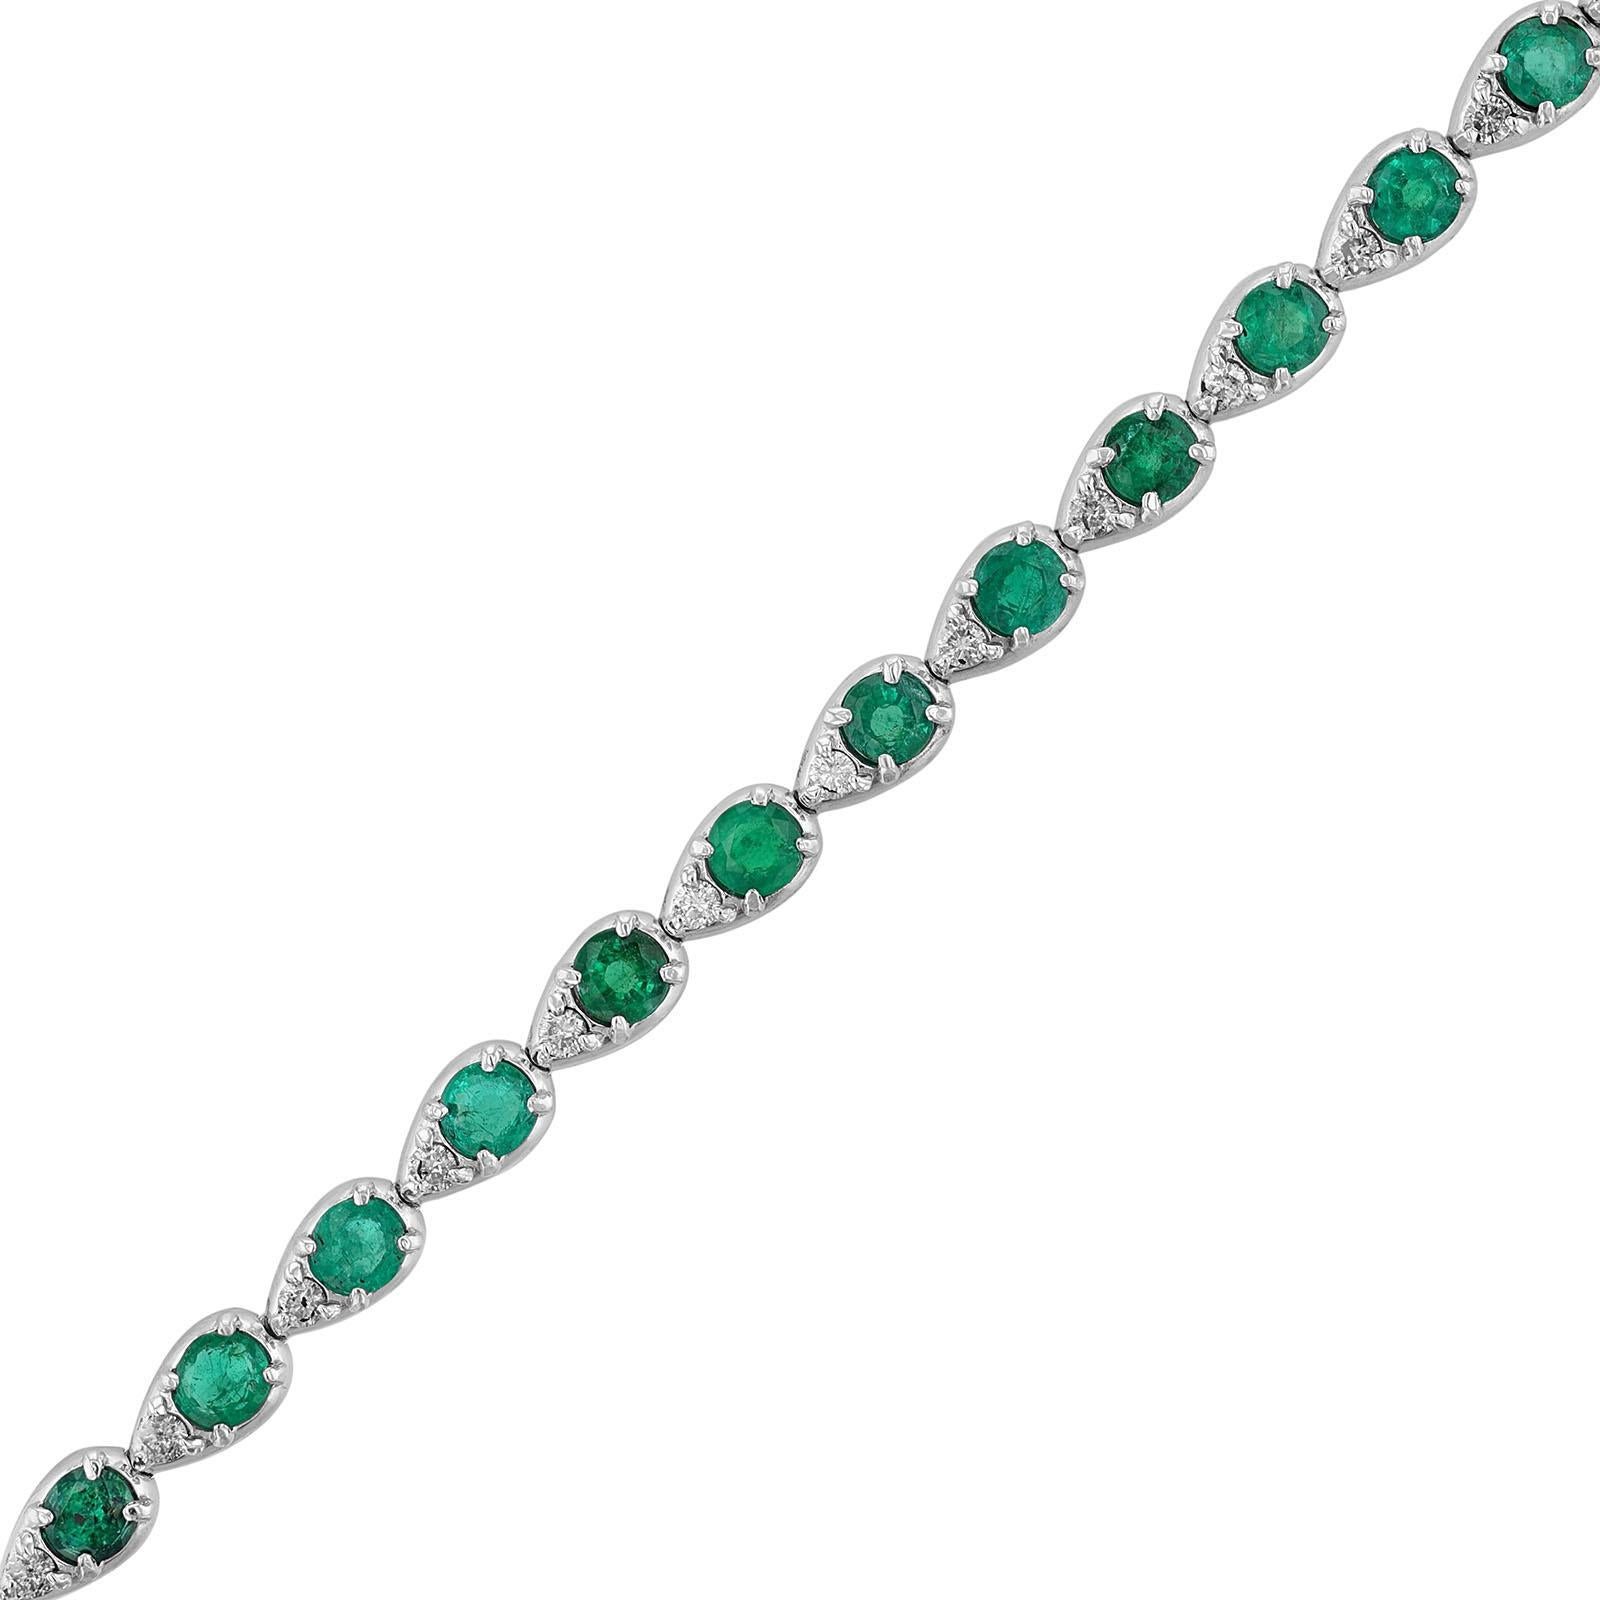 This bracelet is made in 14K white gold. It features 31 round cut emeralds weighing 3.23 carat. Along with 31 round cut diamonds weighing 0.40 carats. In pear shape bezels. The bracelet has a color grade of (H) and a clarity grade (SI2).